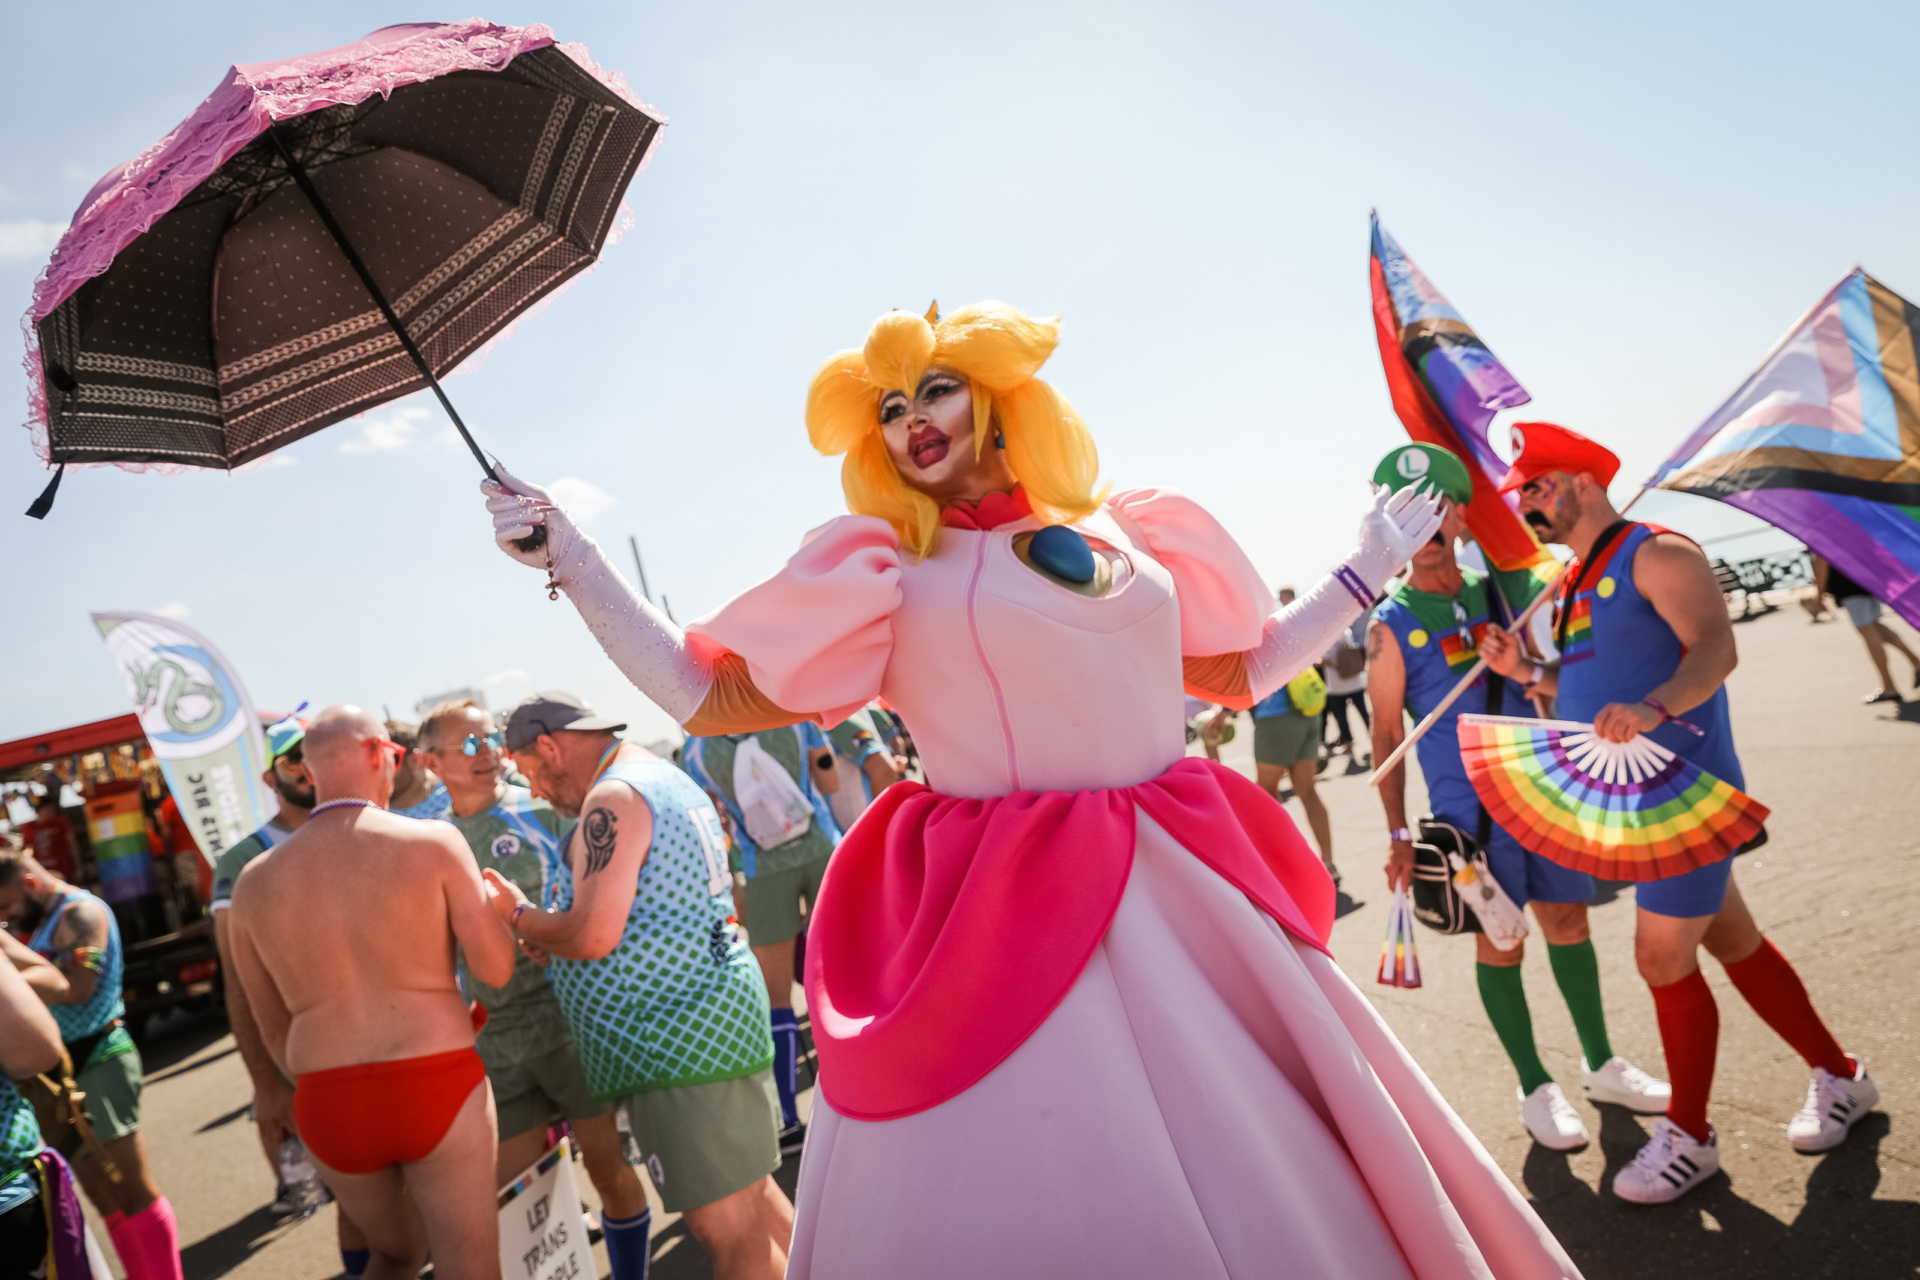 BRIGHTON, England - AUGUST 6: Festival-goers take part in the Pride LGBTQ + Community Parade - 'Love, Protest & Unity' during Brighton Pride on August 6, 2022 in Brighton, England.  (Photo by Tristan Viewings/Getty Images)